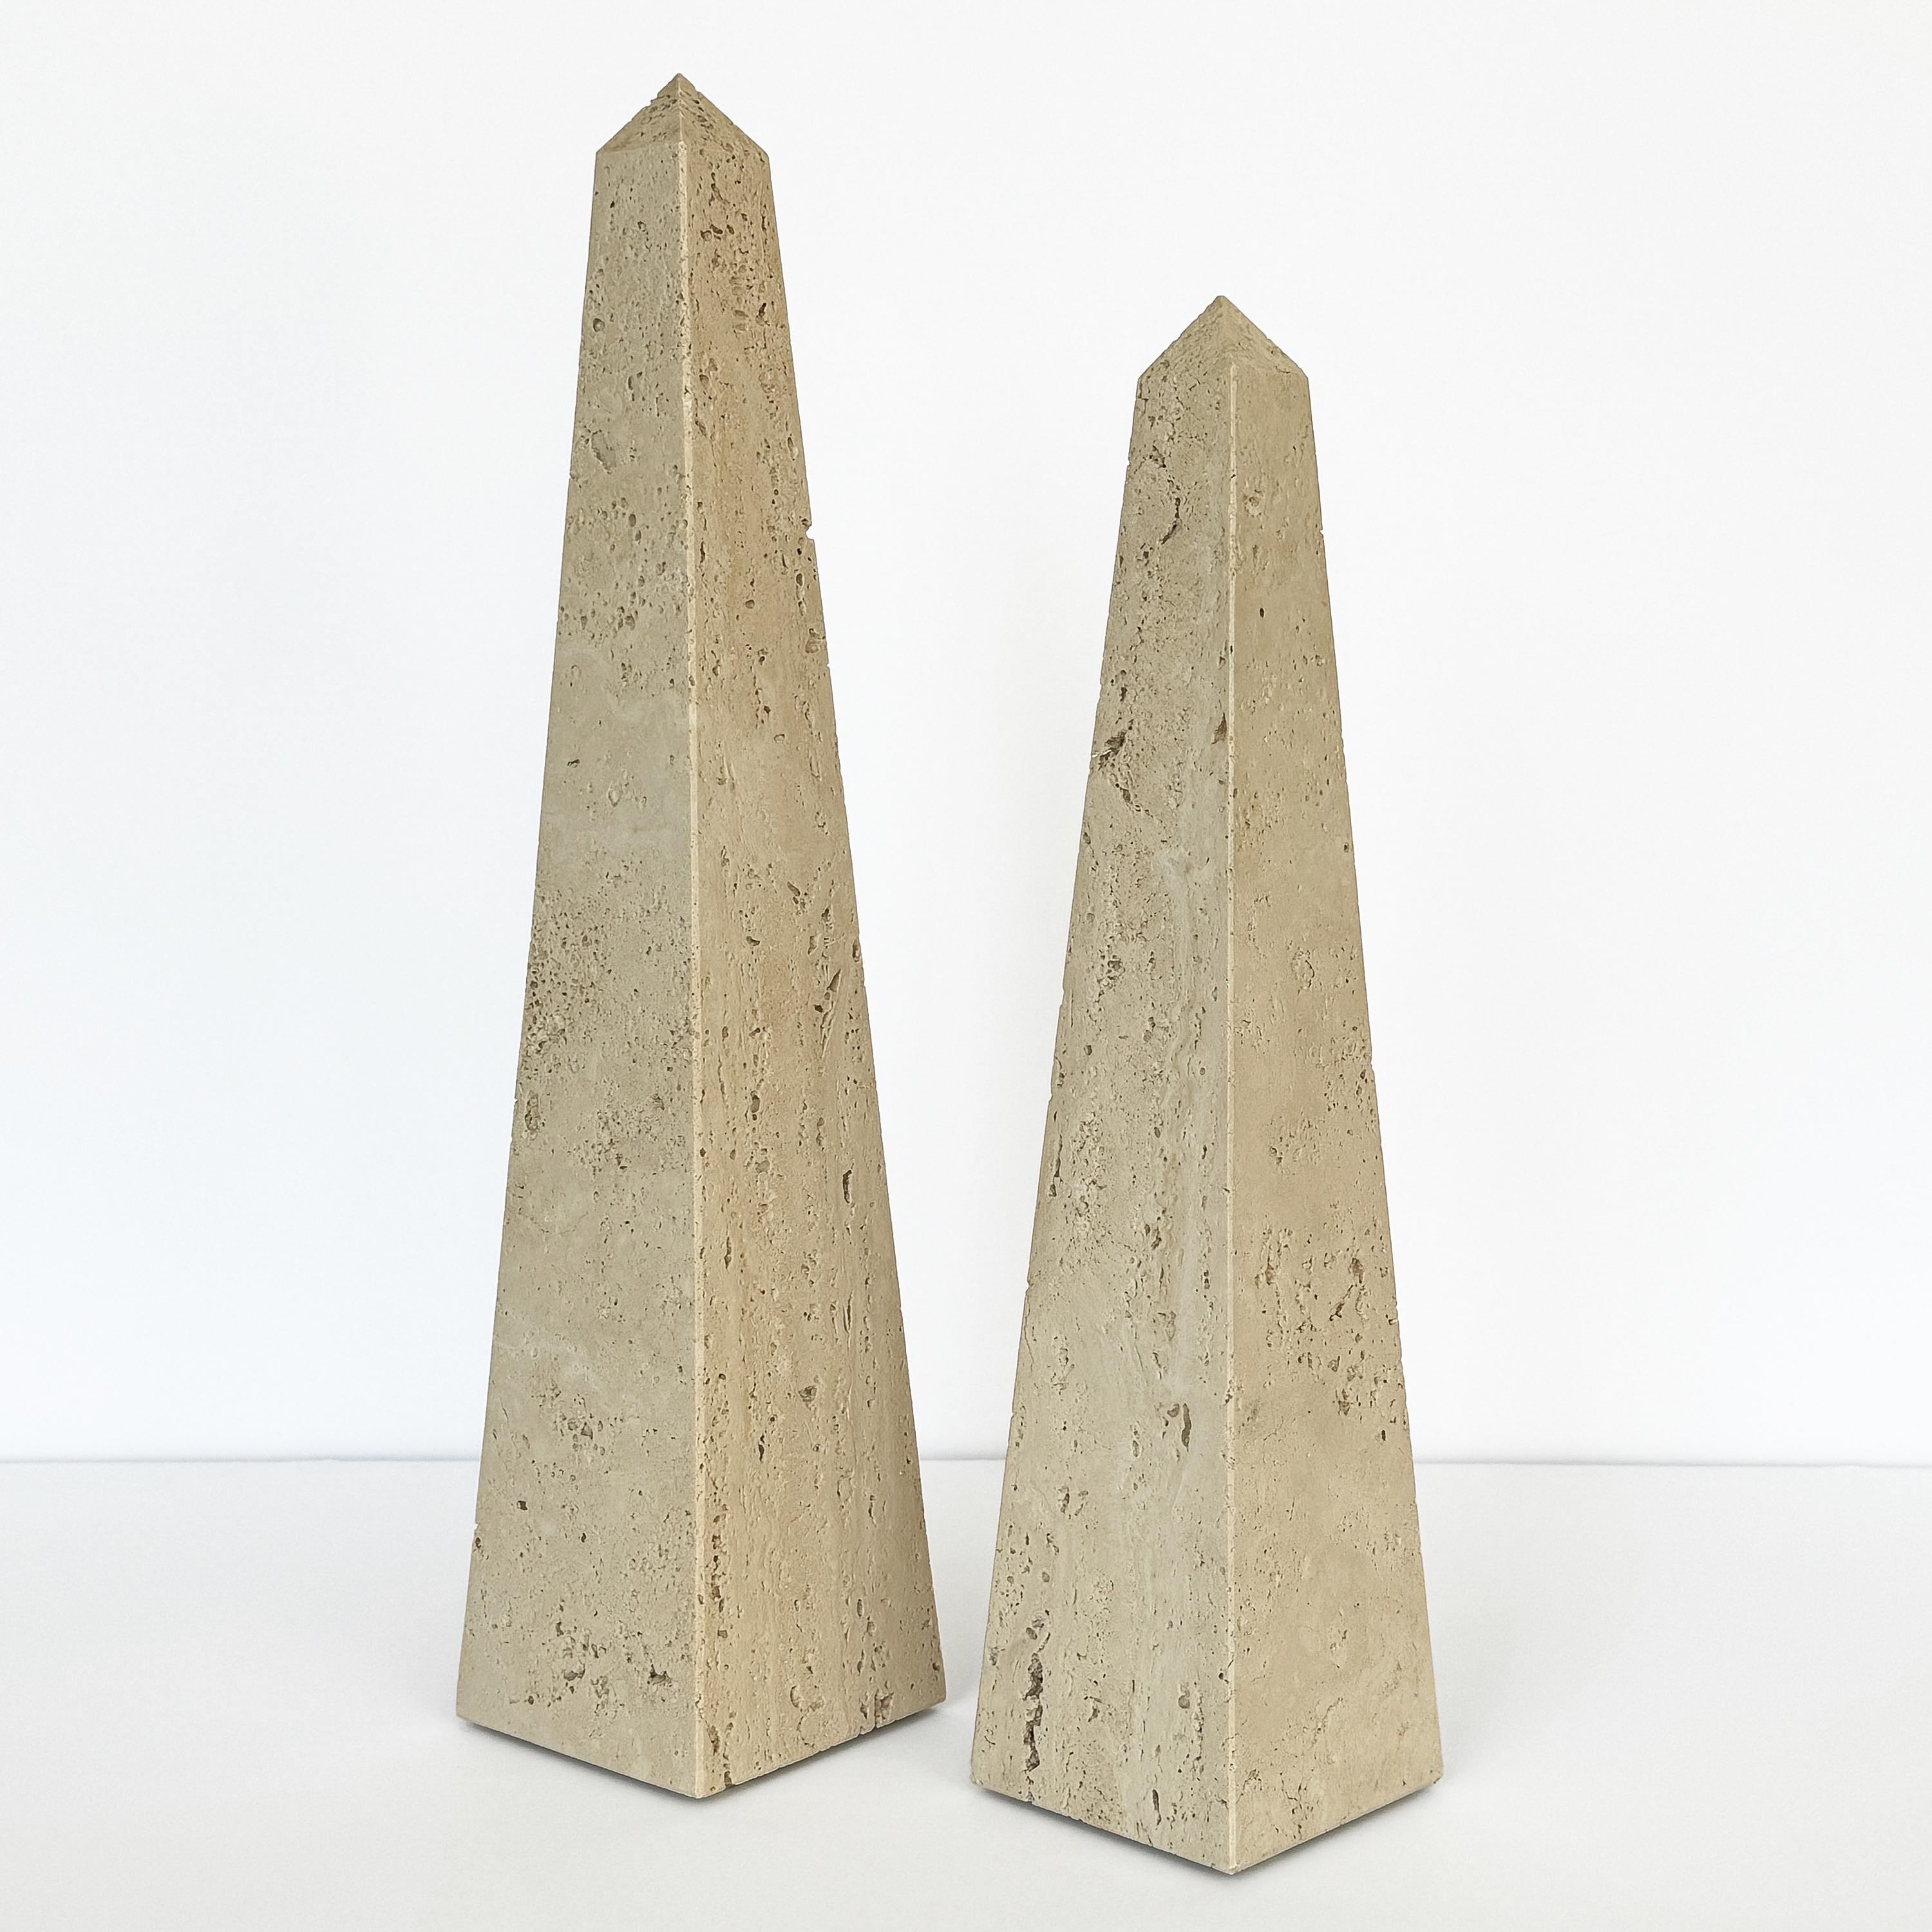 This set of two large Italian solid travertine stone obelisk sculptures from the 1970s is a striking example of timeless elegance and refined design, reminiscent of the work of Fratelli Mannelli. Crafted from beautiful unfilled travertine, these